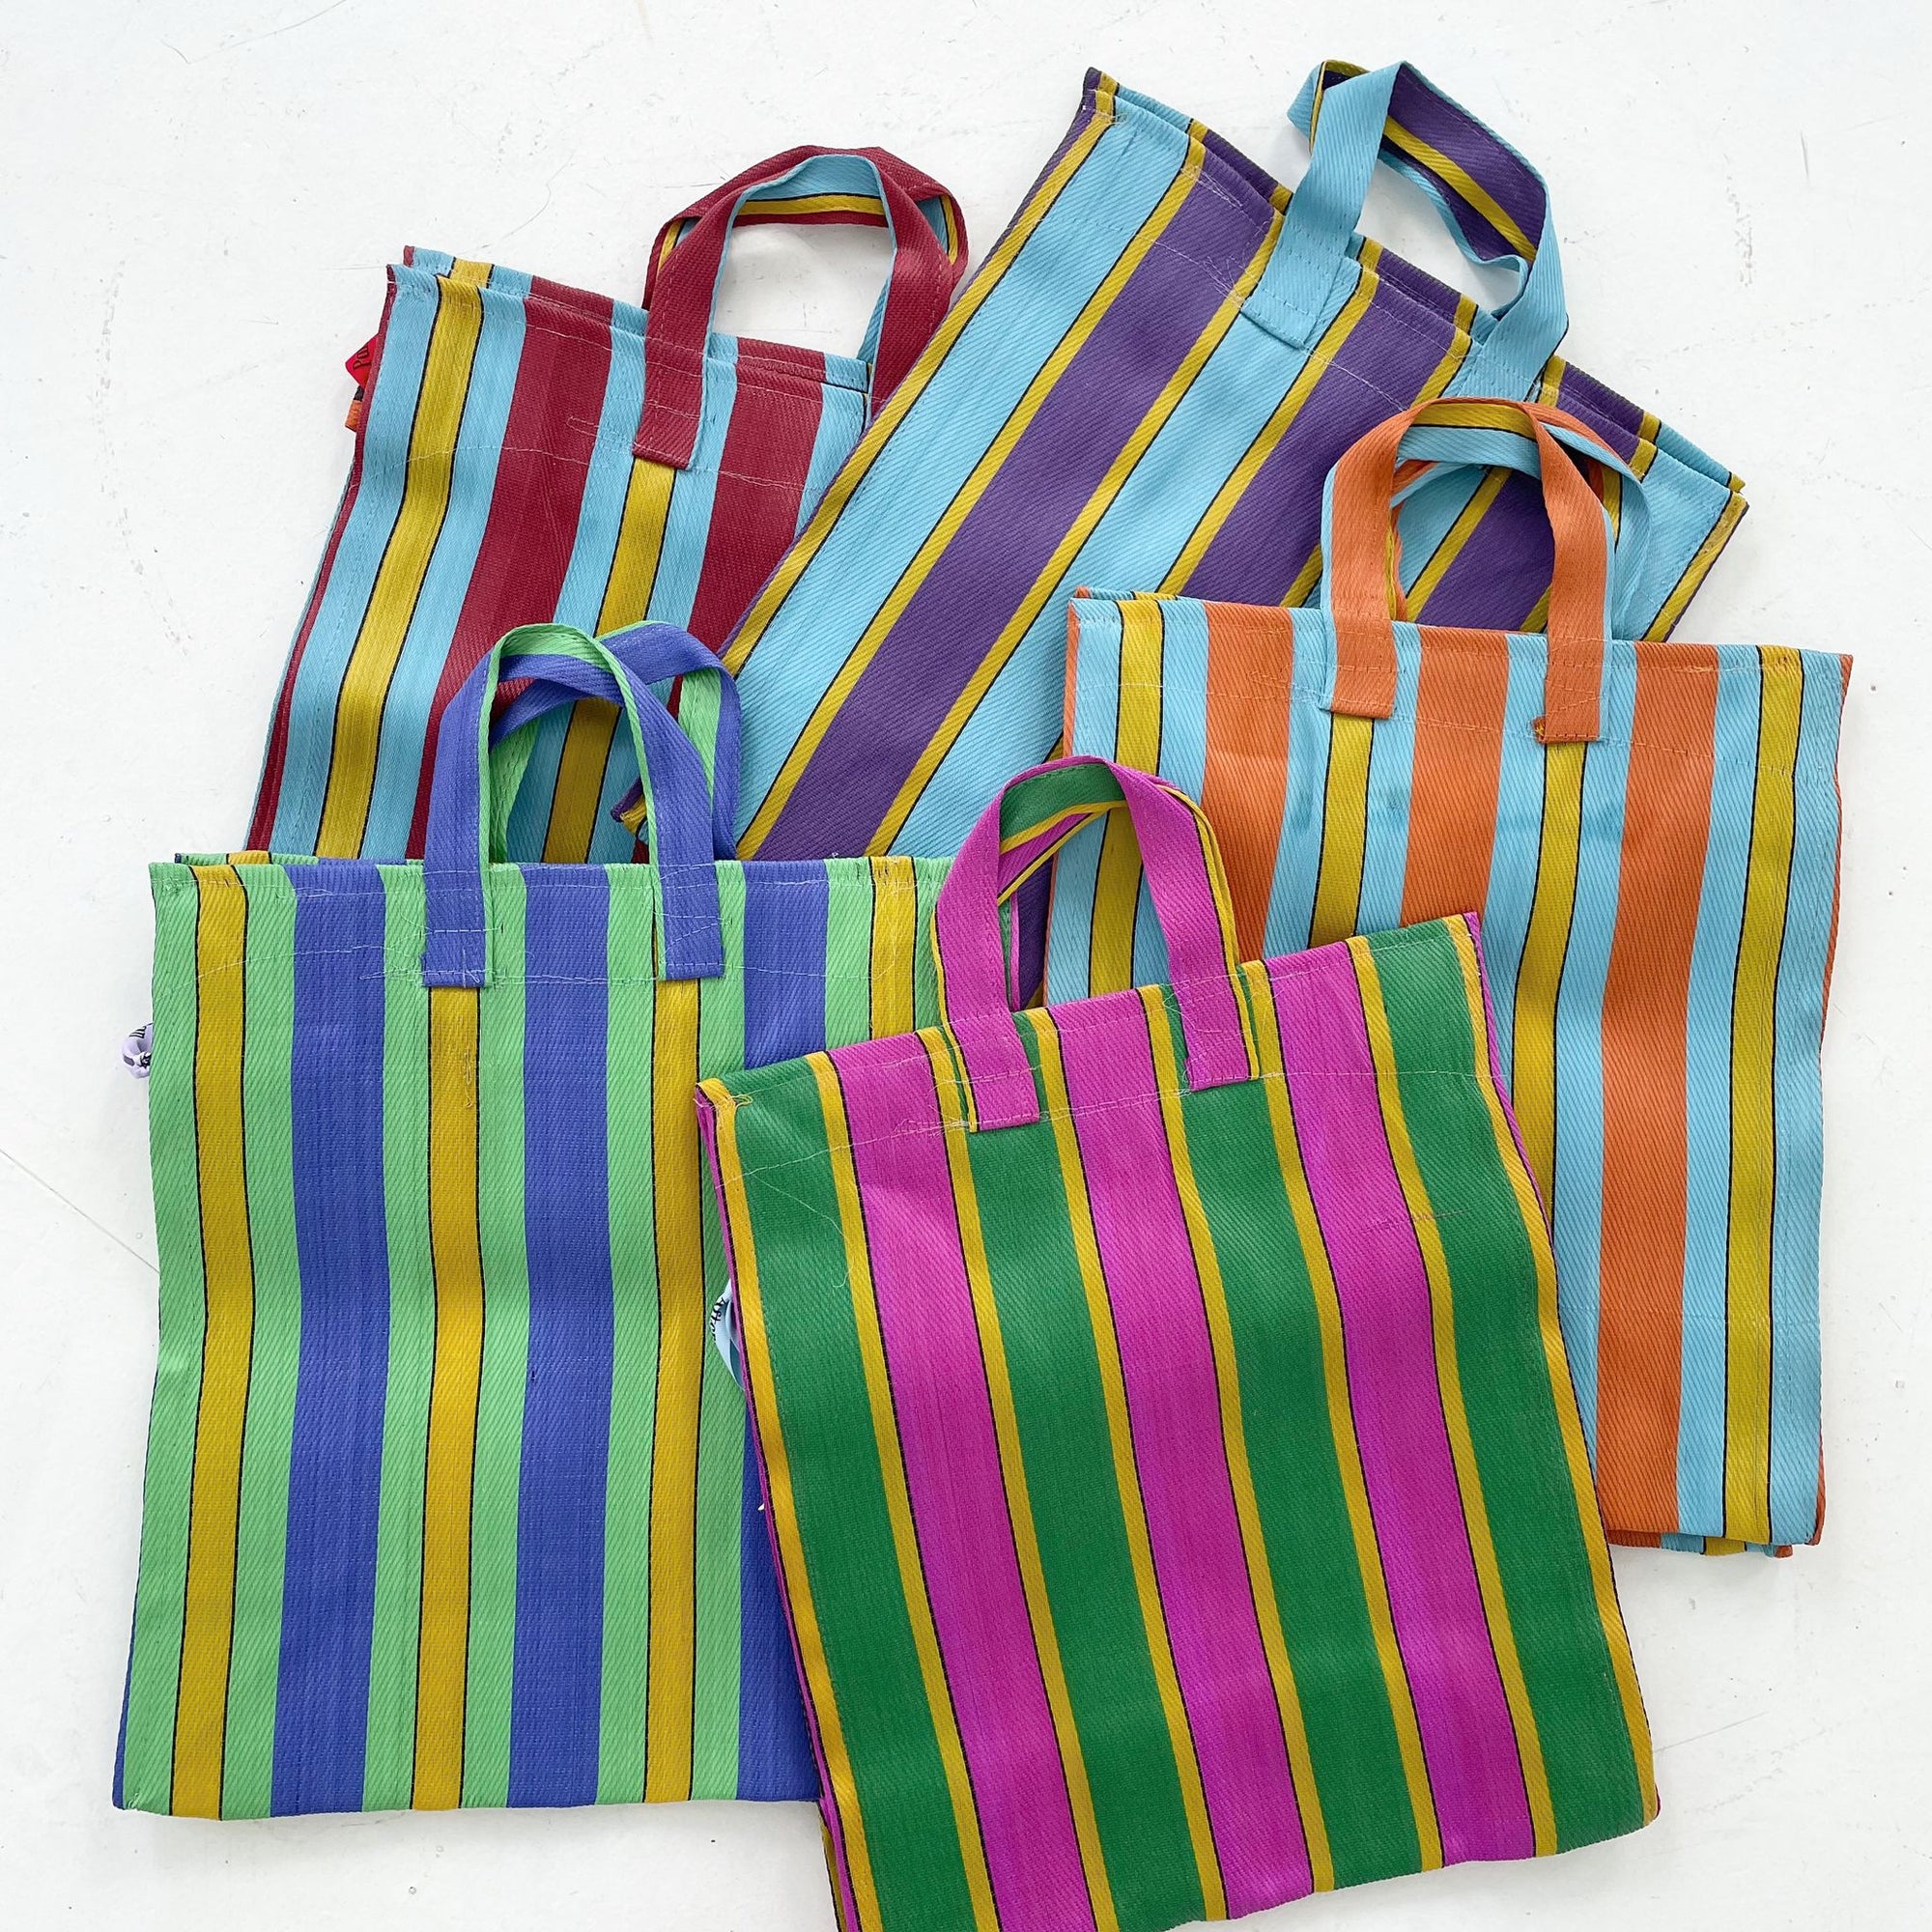 PAN AFTER DAY TO DAY STRIPE BAG: SMALL